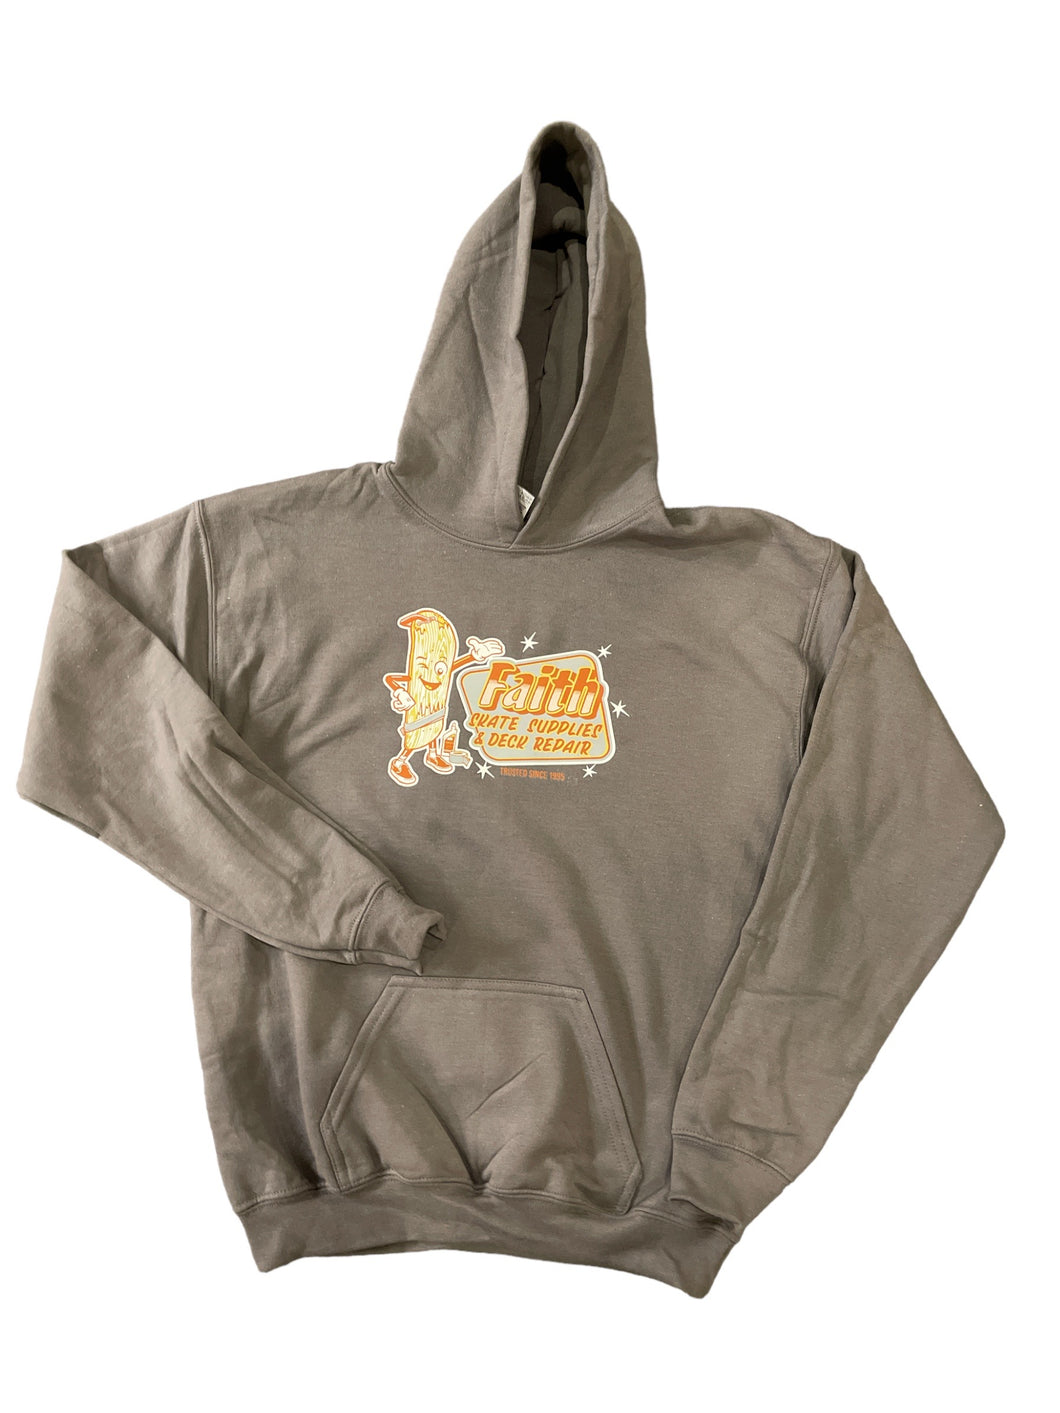 Faith X Skateshop Day Youth Size Hoodie - Charcoal